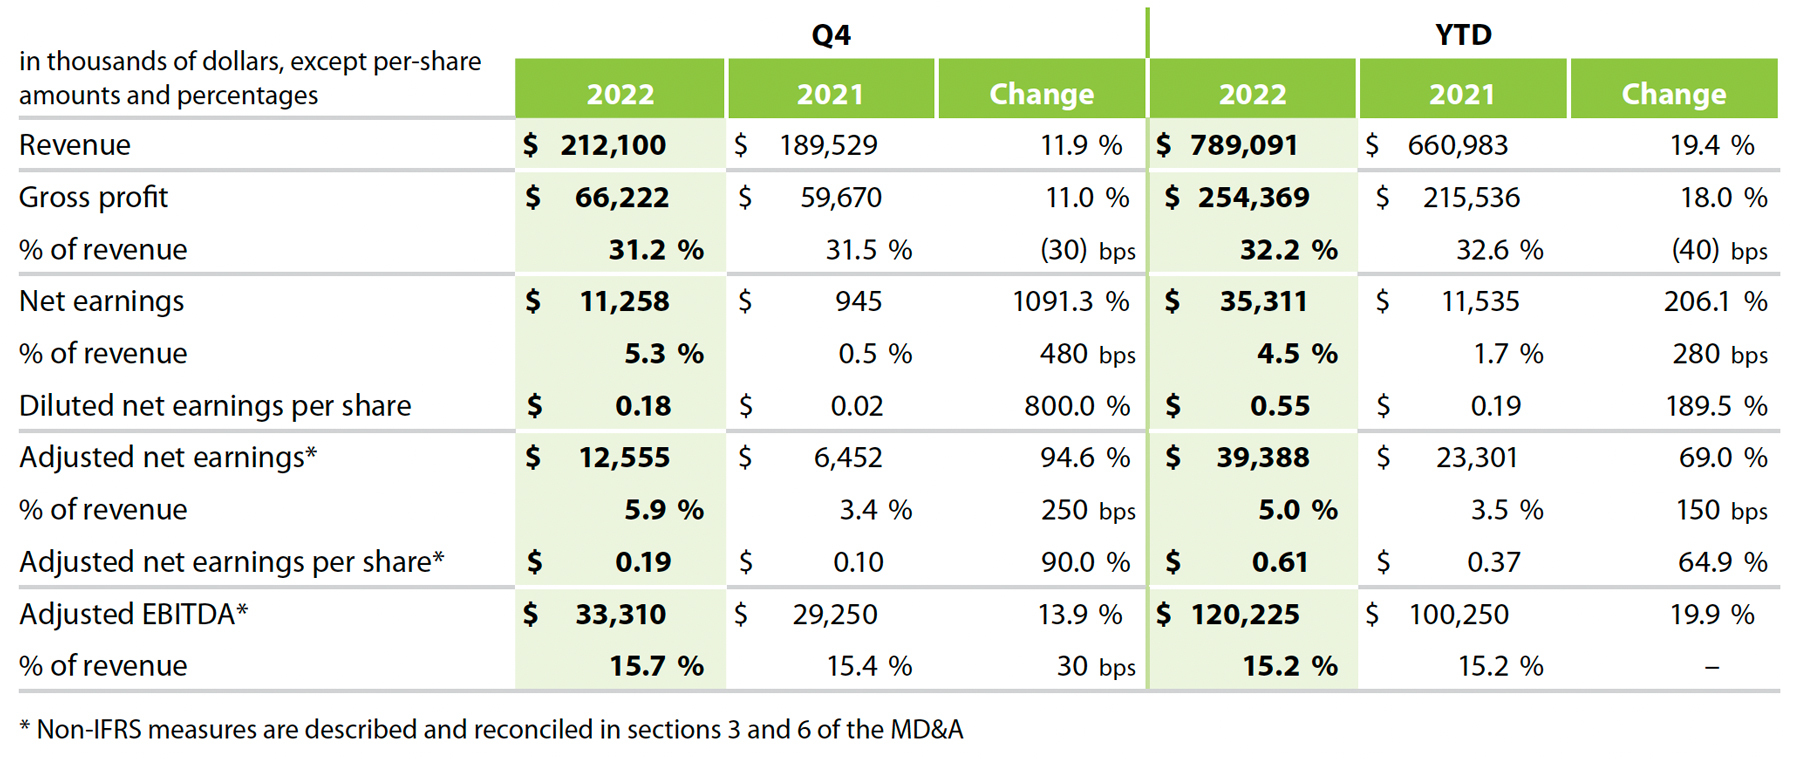 Highlights – Q3 2022 compared to Q4 2021 and YTD Results